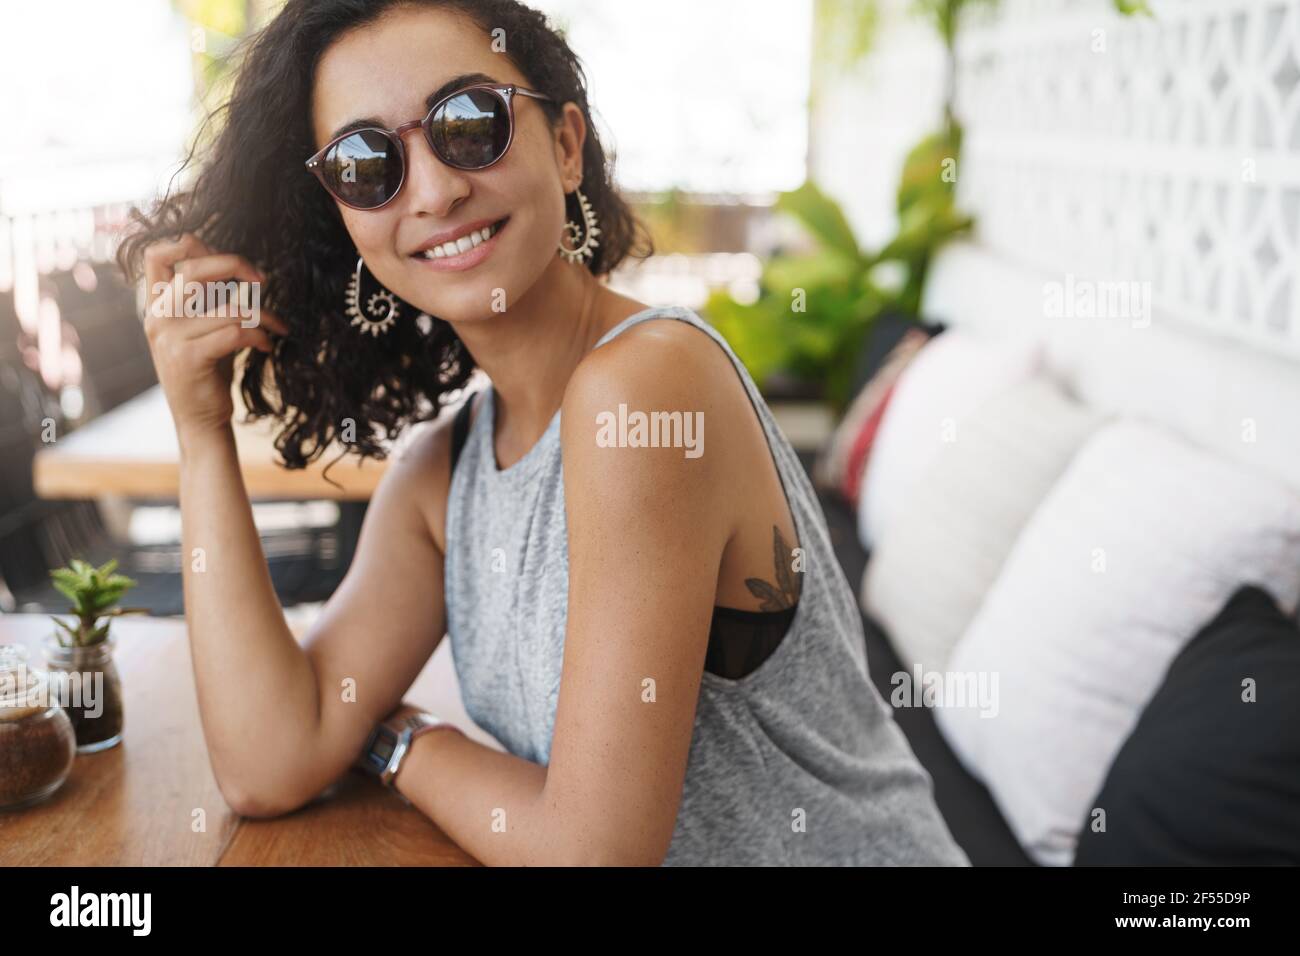 You are smooth talker. Attractive flirty girl sitting cafe patio summer sunglasses lean coffee table turn camera joyfully smiling woman enjoying Stock Photo